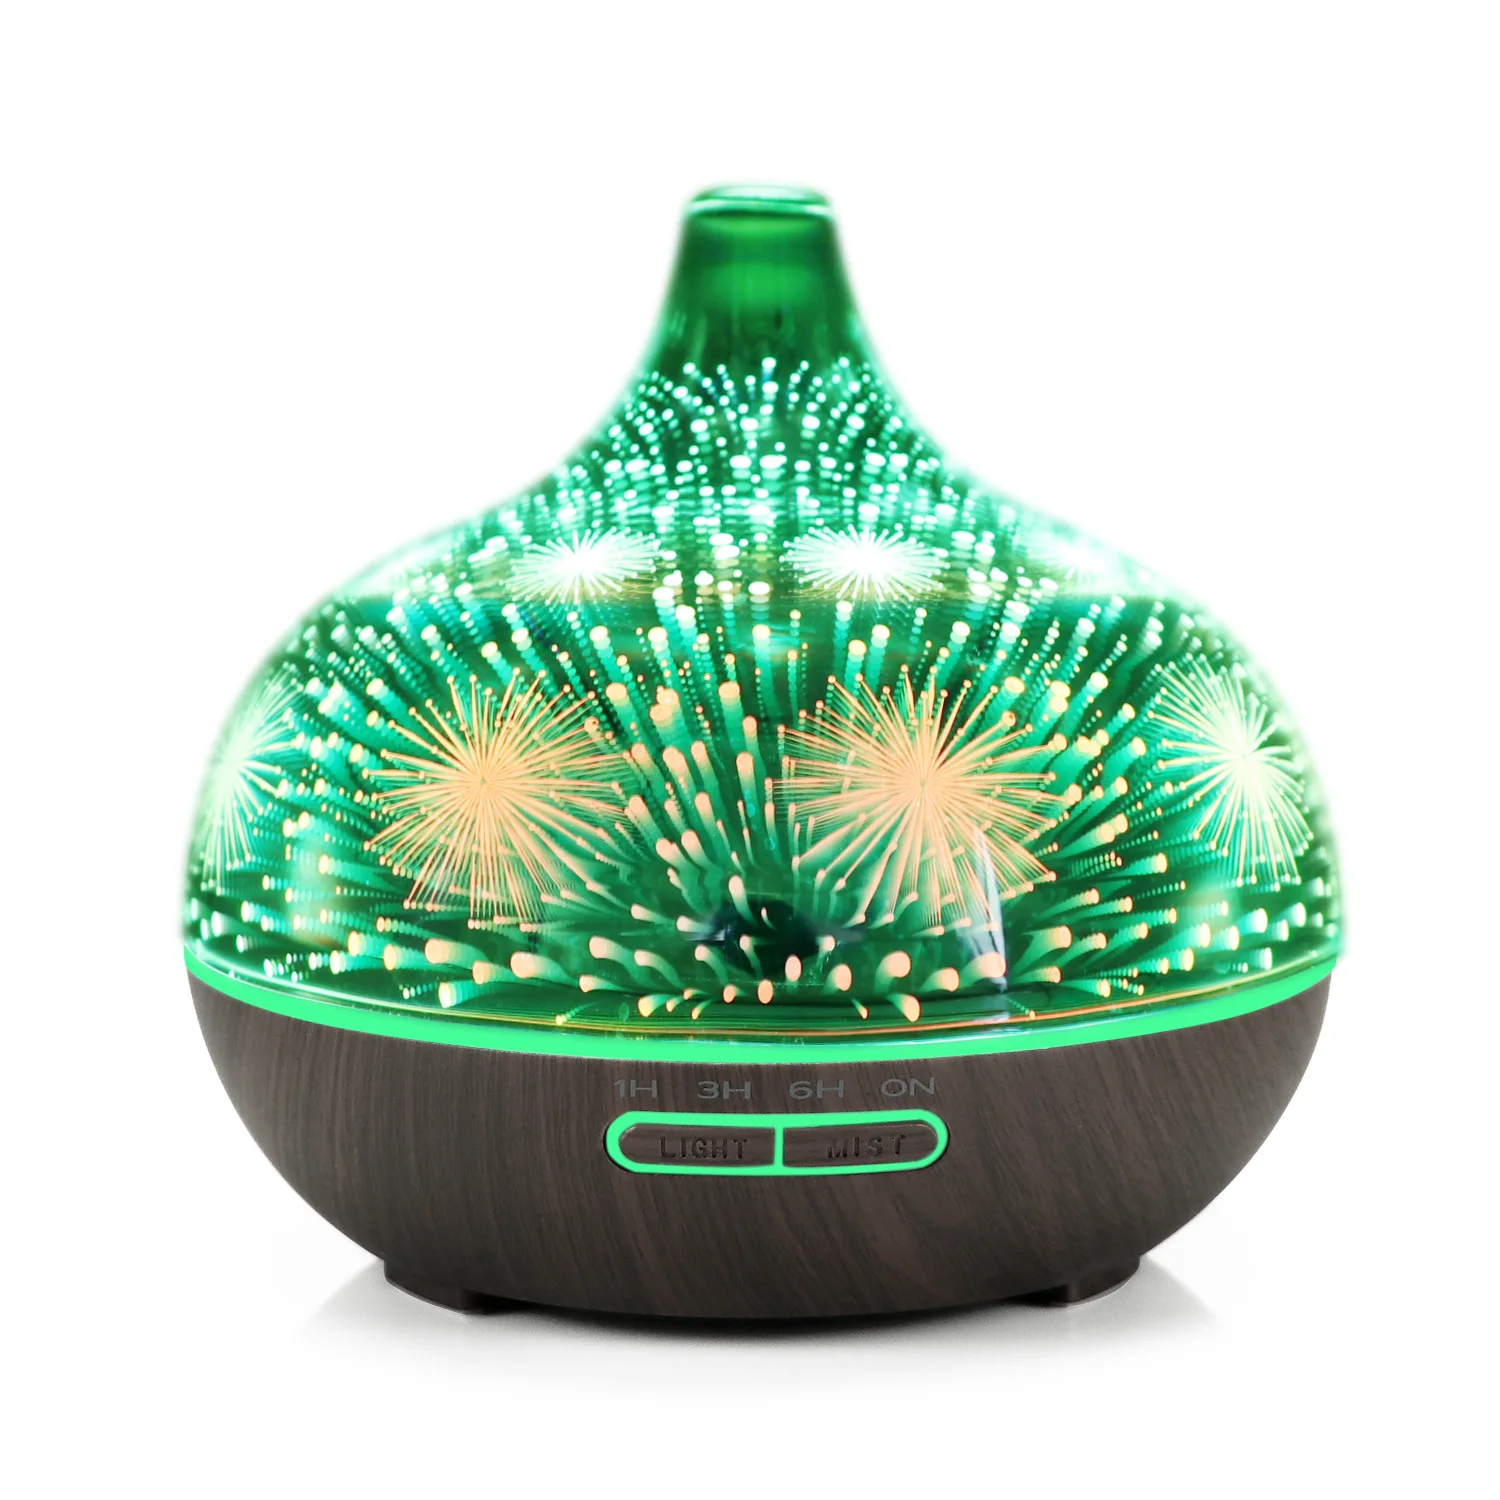 400ml Aroma Diffuser Humidifier 3d Colorful Fireworks Aromatherapy Night Light Glass Home Ultrasonic Essential Oil Diffuser enlarge